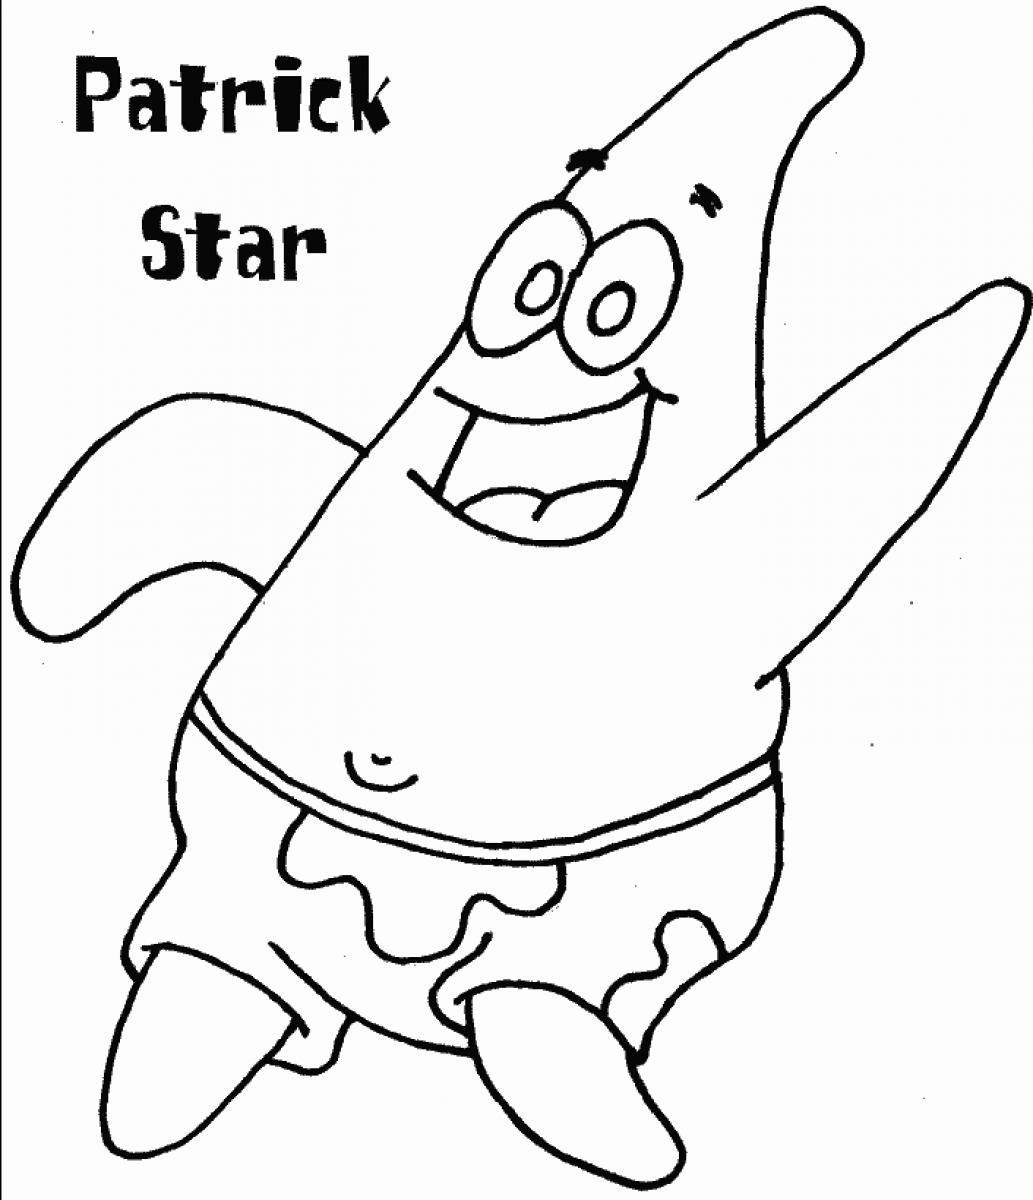 patrick star spongebob coloring page | Only Coloring Pages